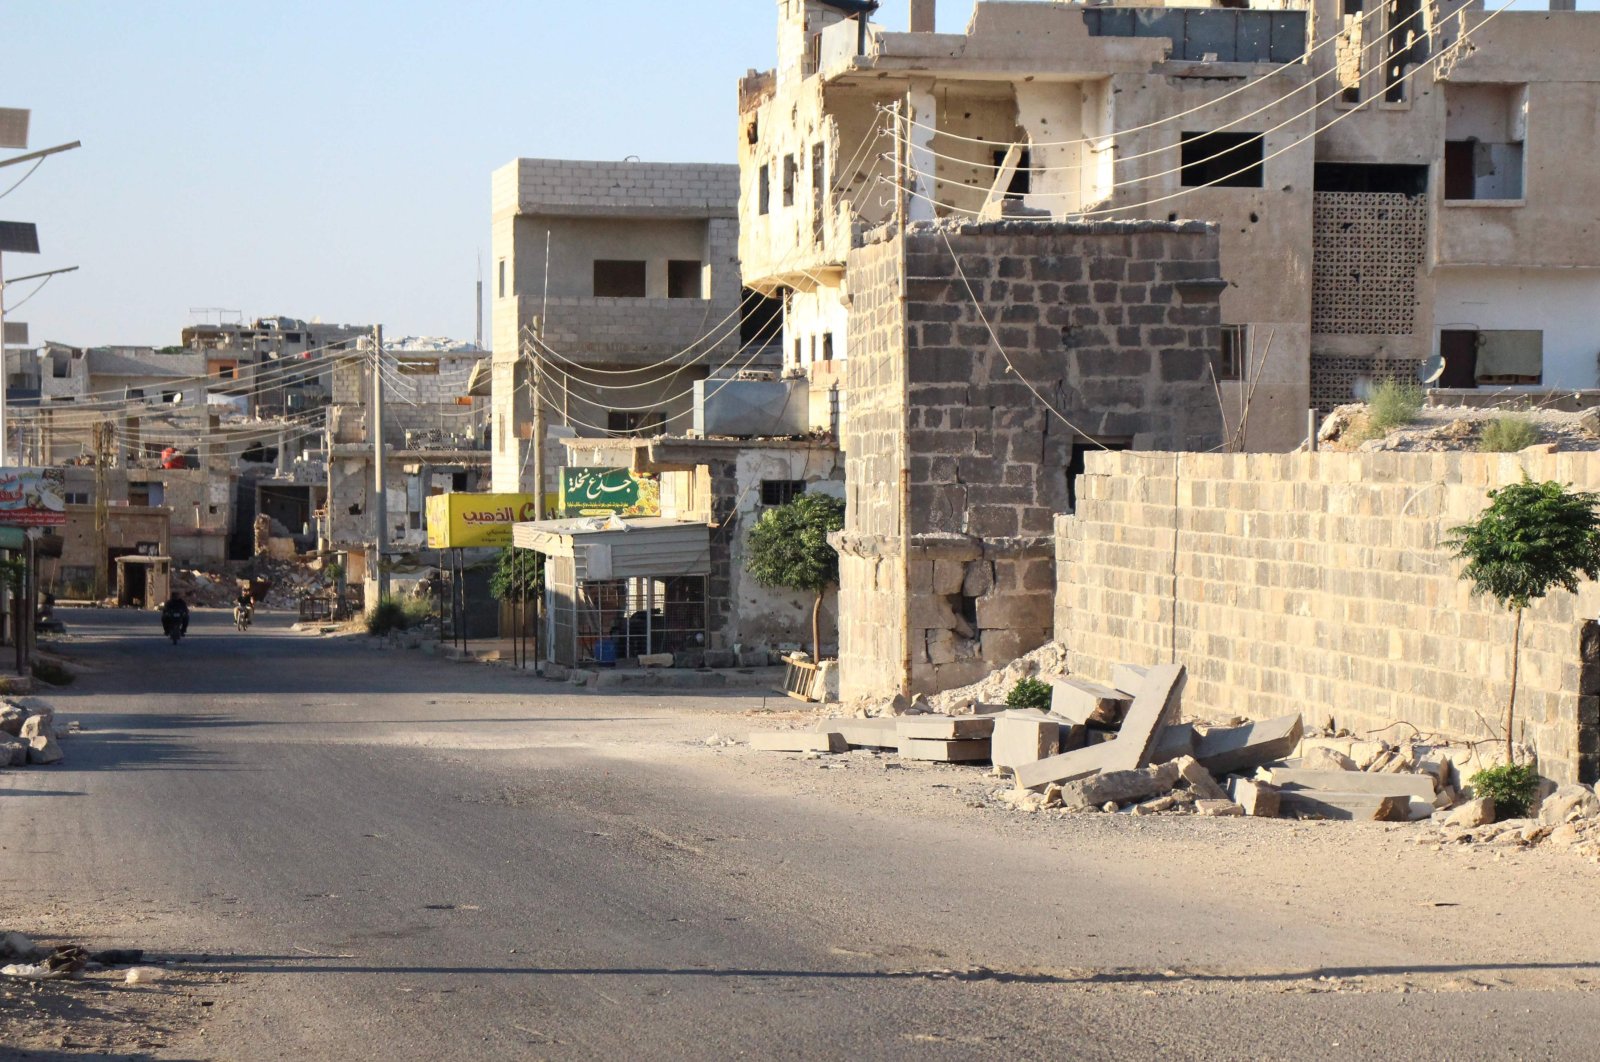 A picture shows the Syrian district of Daraa al-Balad deserted following fighting between regime forces and armed opposition groups in Syria's southern province of Daraa, on Aug. 16, 2021. (AFP Photo)